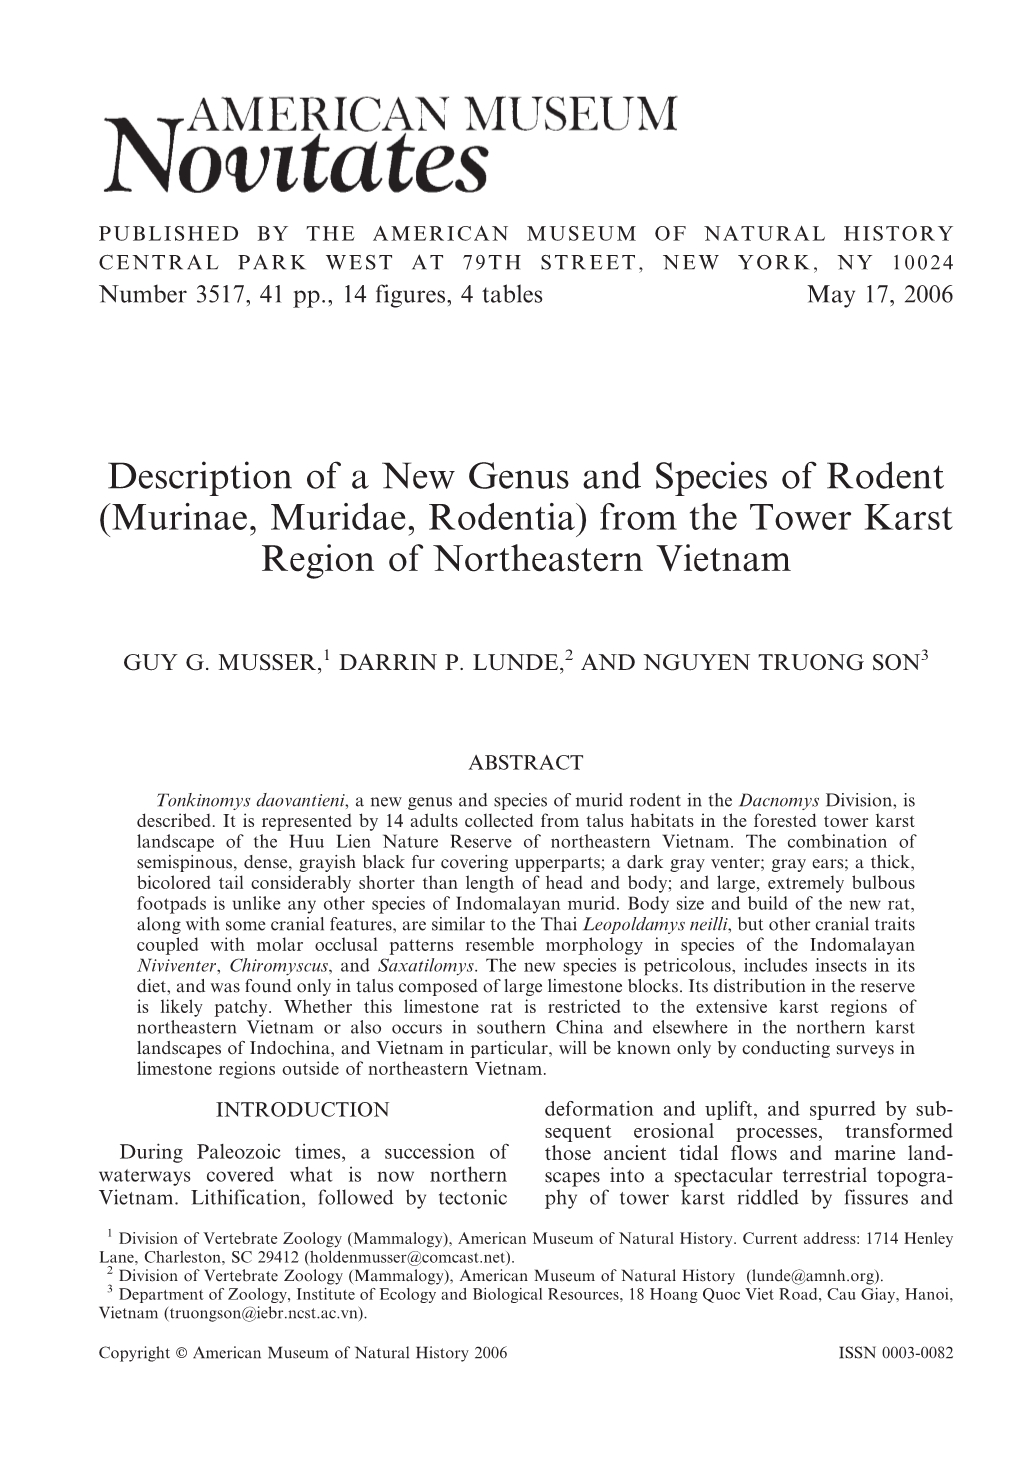 Description of a New Genus and Species of Rodent (Murinae, Muridae, Rodentia) from the Tower Karst Region of Northeastern Vietnam